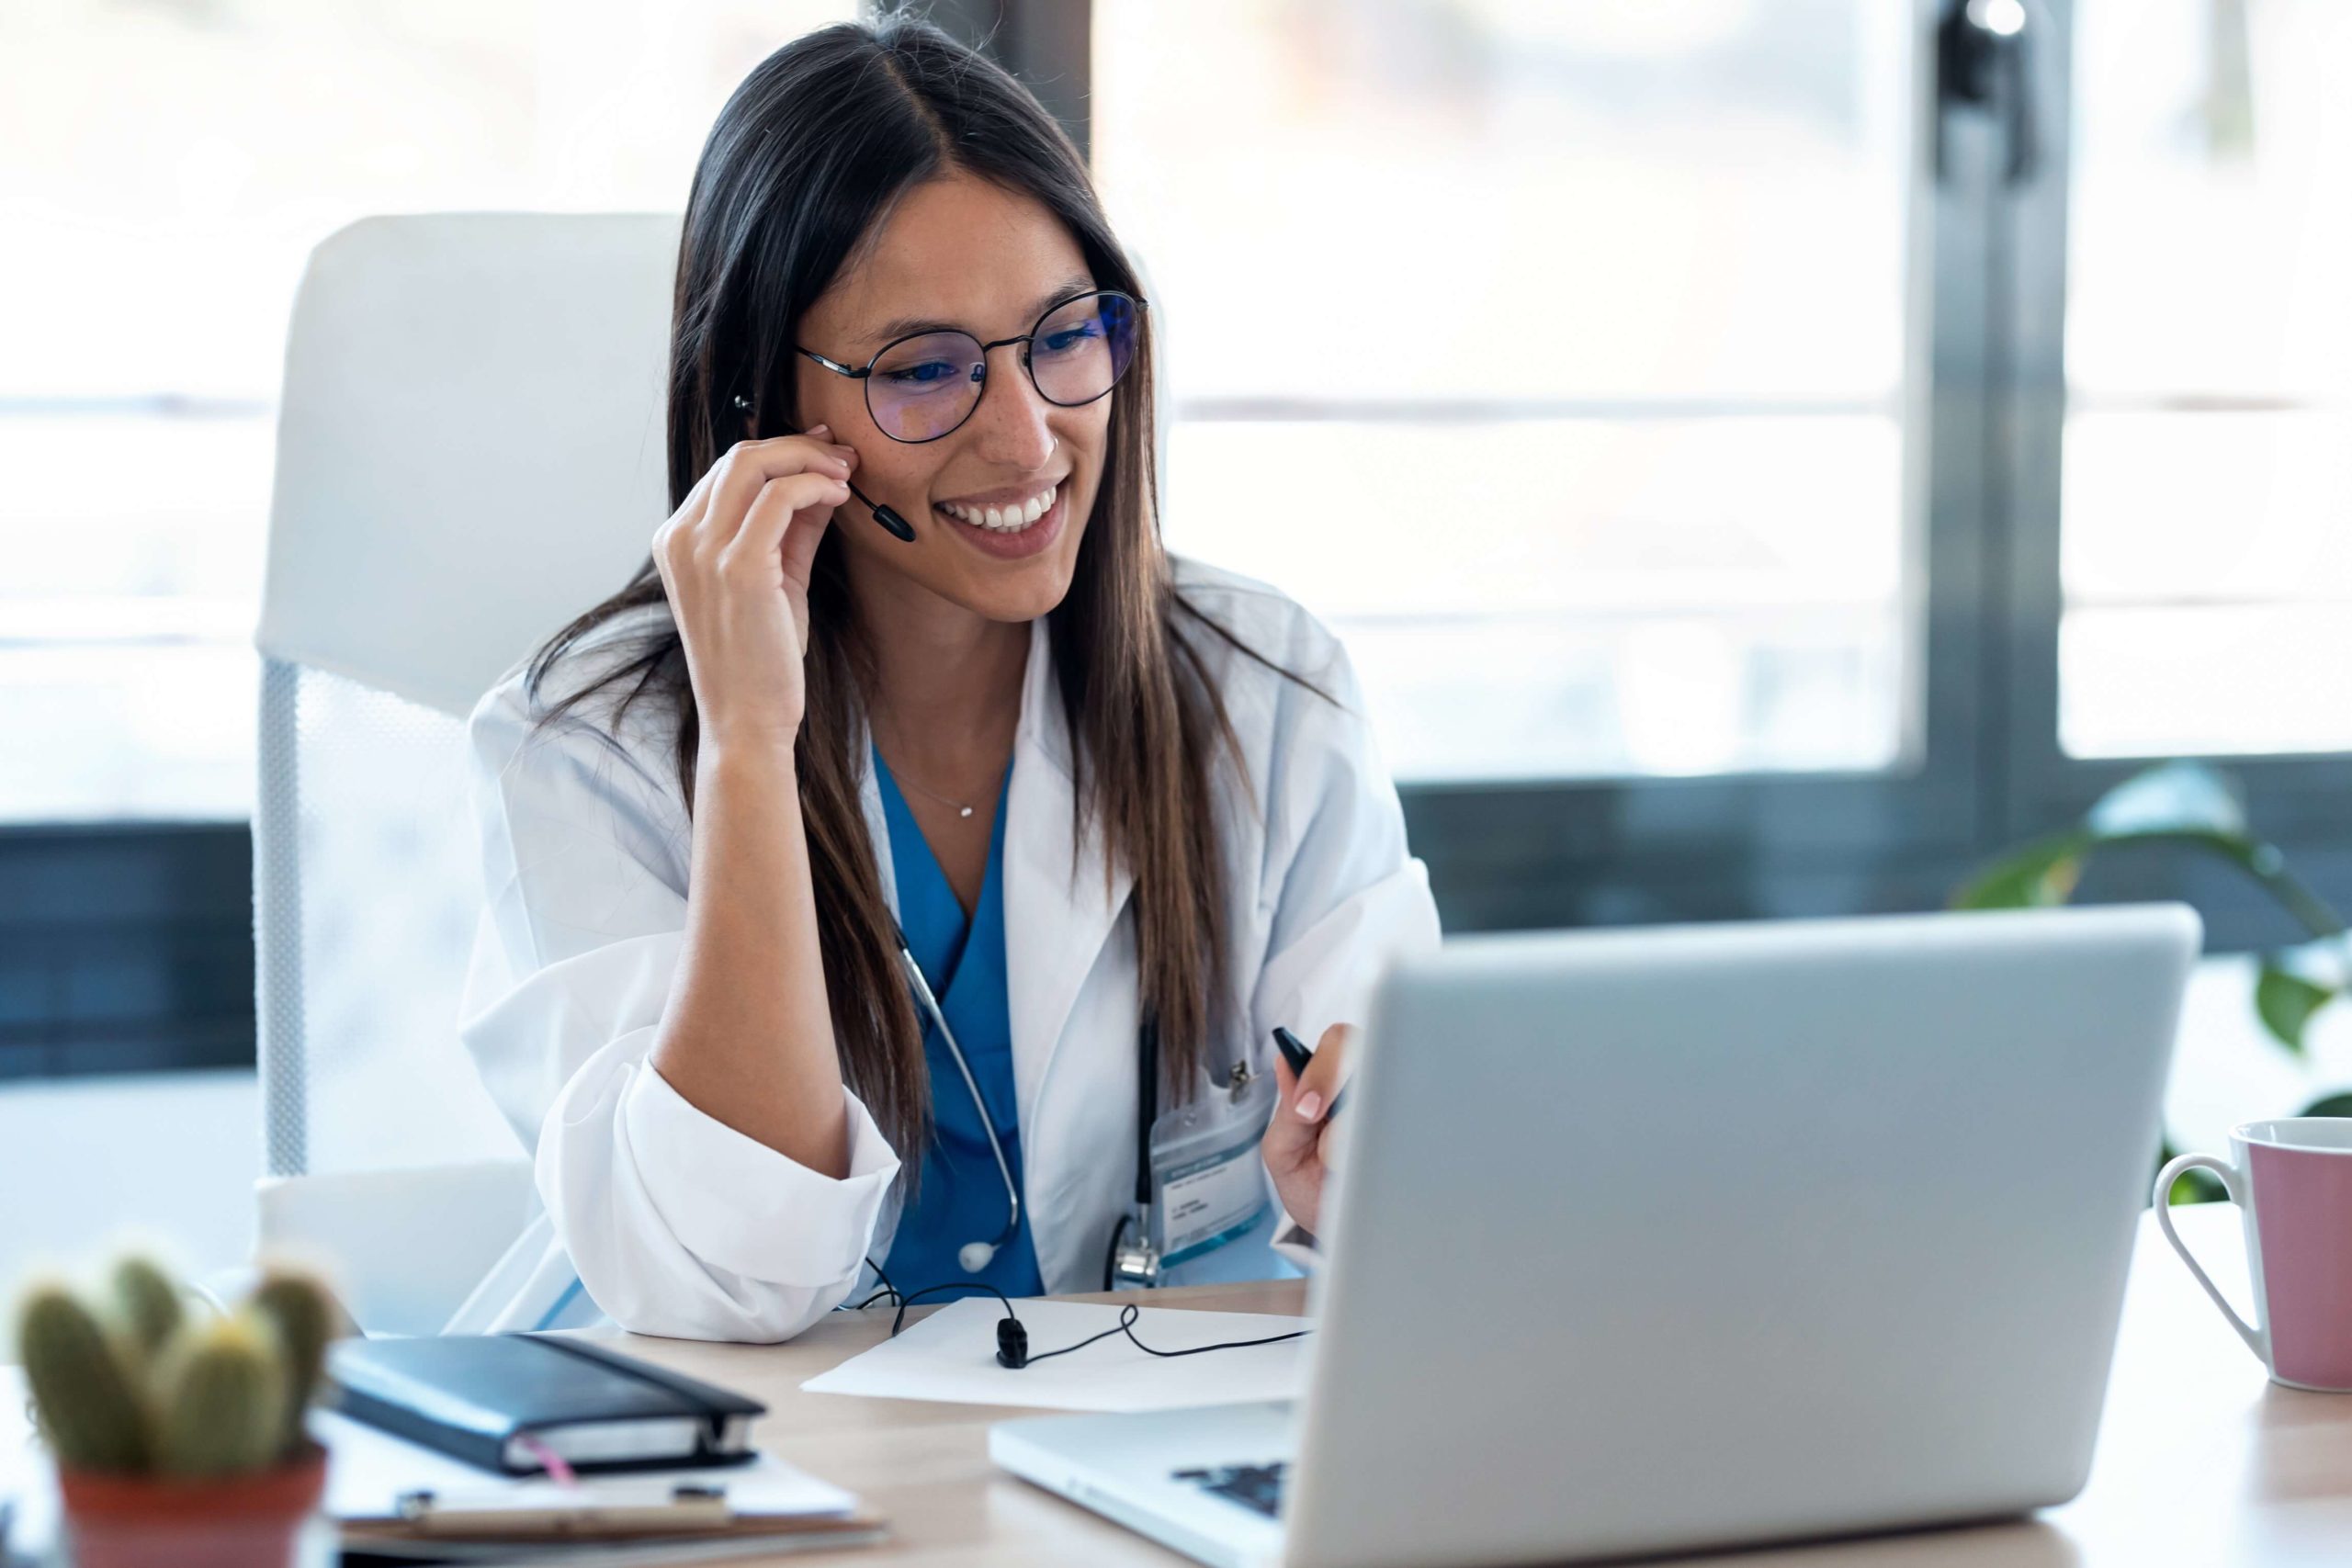 The Growth of Telehealth & Chronic Care Management in the Wake of COVID-19